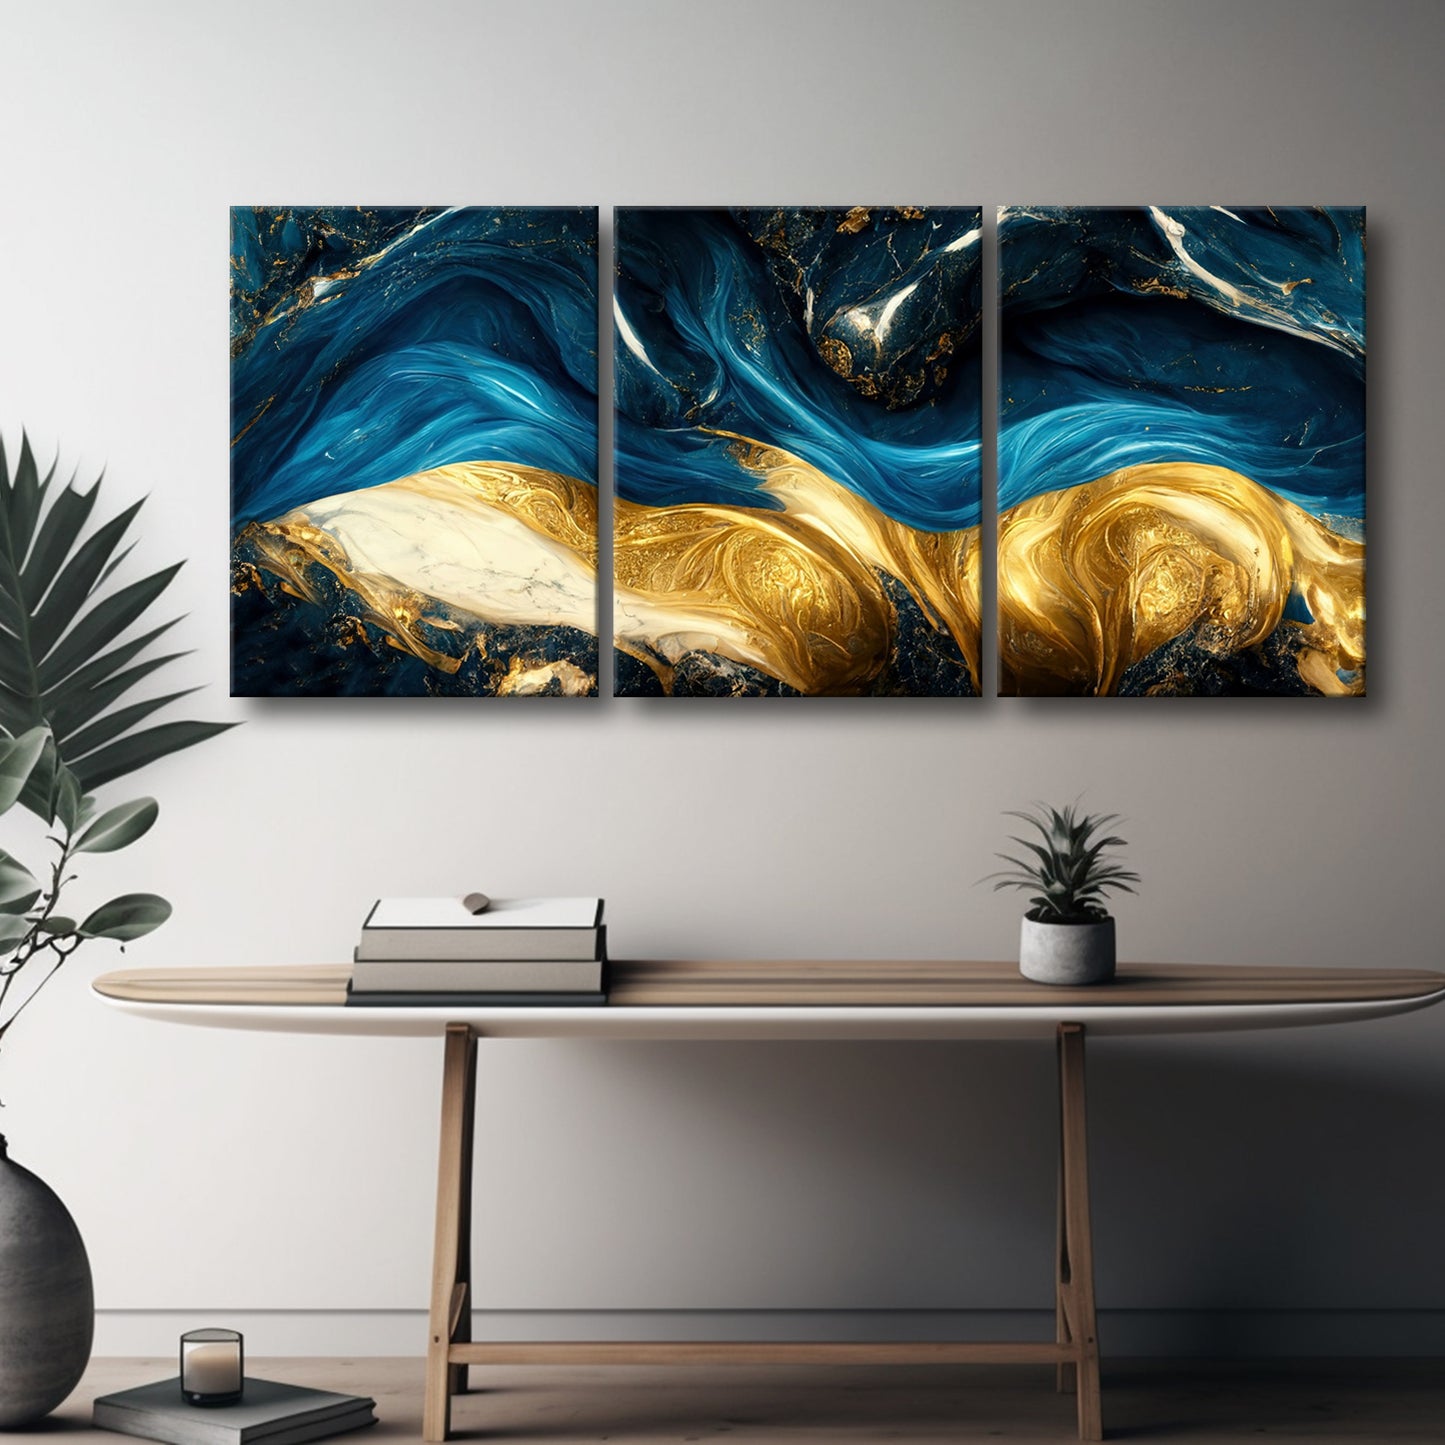 Eternal Confluence: Capturing the Dance of Golden and Bluish Liquid Textures, Resembling Turbulent Waves, in a Mesmerizing Symphony of Fluidity and Grace - S05E106